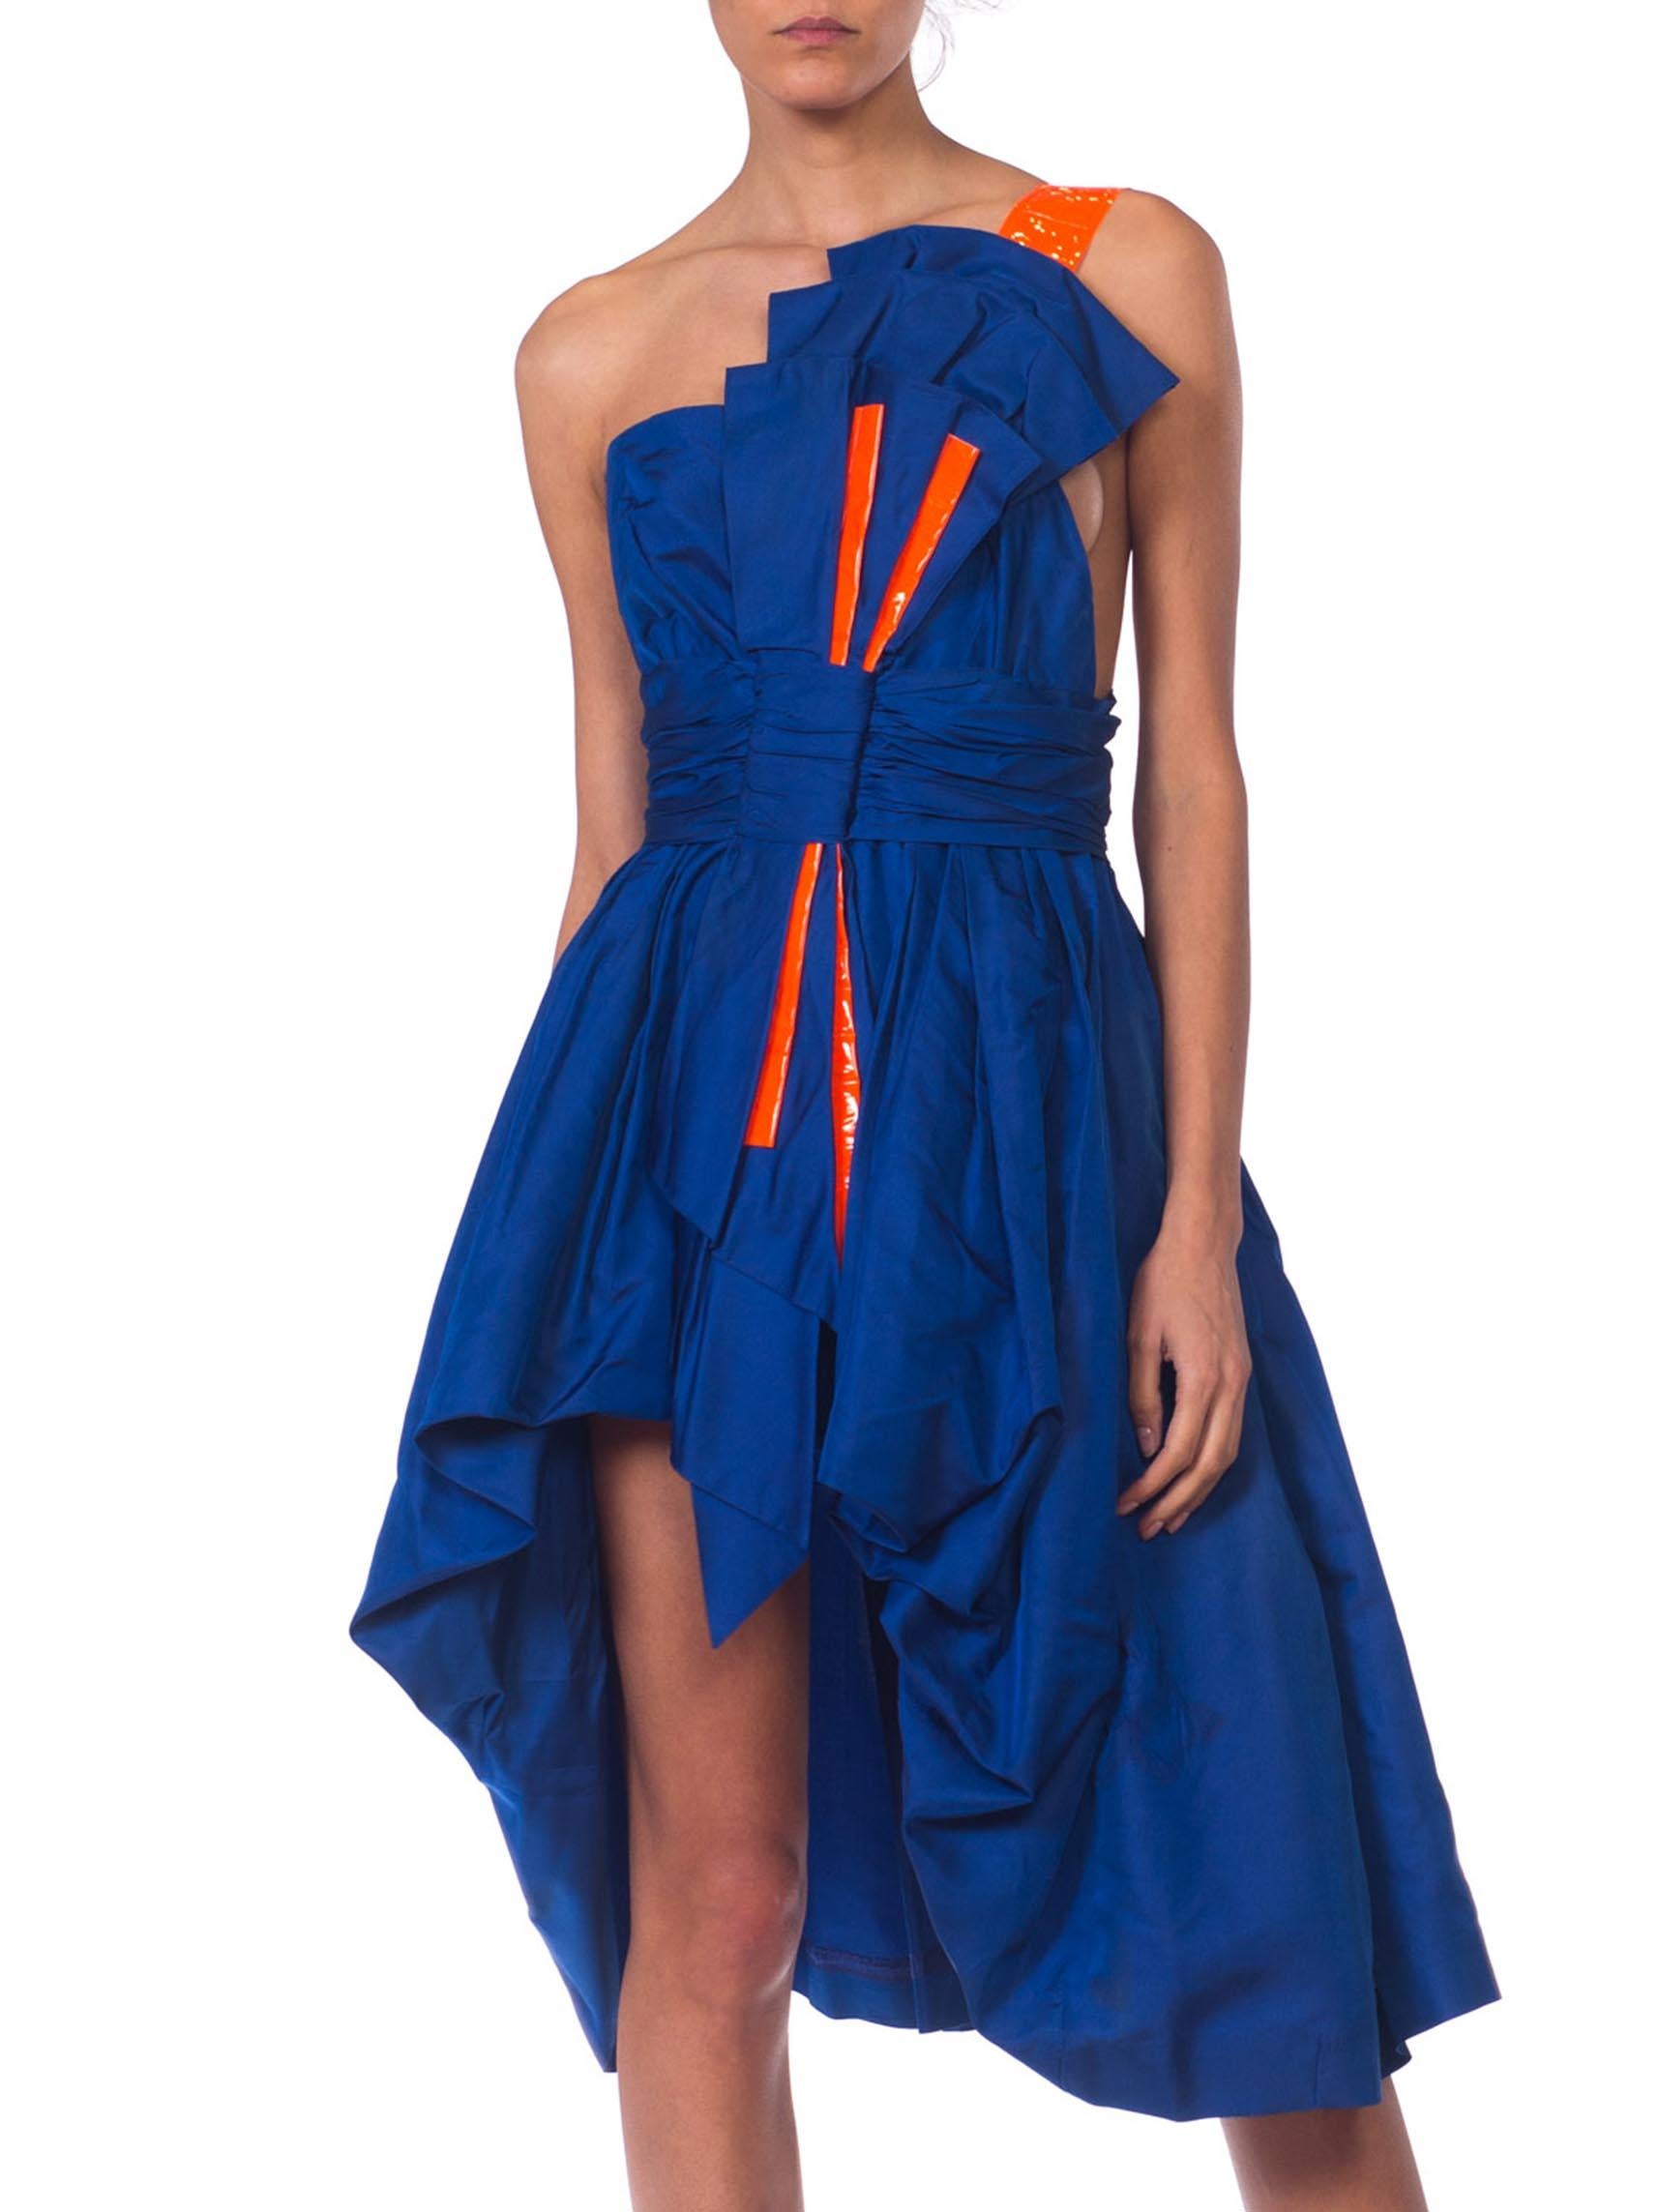 MORPHEW COLLECTION Sapphire Blue  Silk Taffeta Reworked 1950S High-Low Cocktail Dress With Large Bow & Neon Orange Accents
MORPHEW COLLECTION is made entirely by hand in our NYC Ateliér of rare antique materials sourced from around the globe. Our